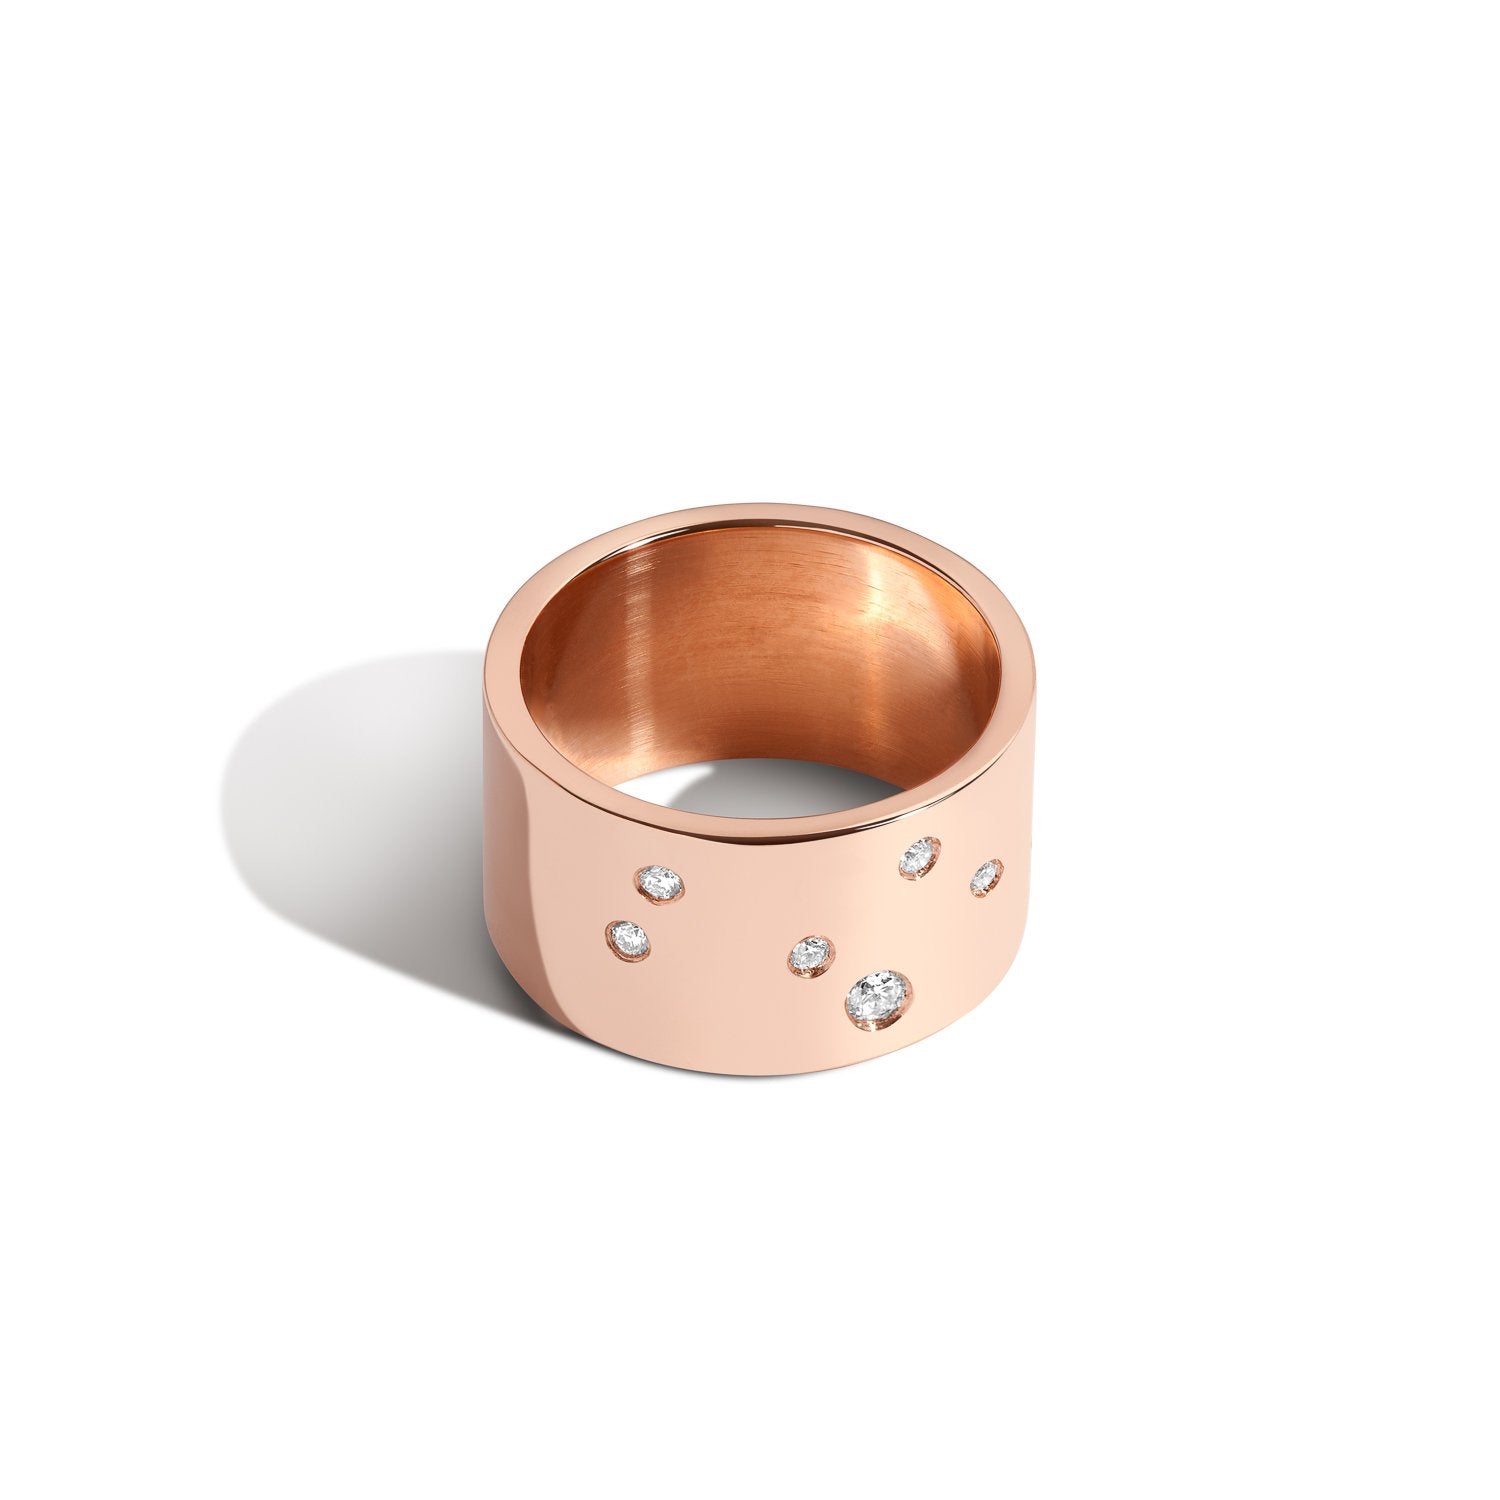 Shahla Karimi Jewelry Zodiac Reveal Ring Collection with White Diamonds - Leo - 14K Rose Gold - Front View